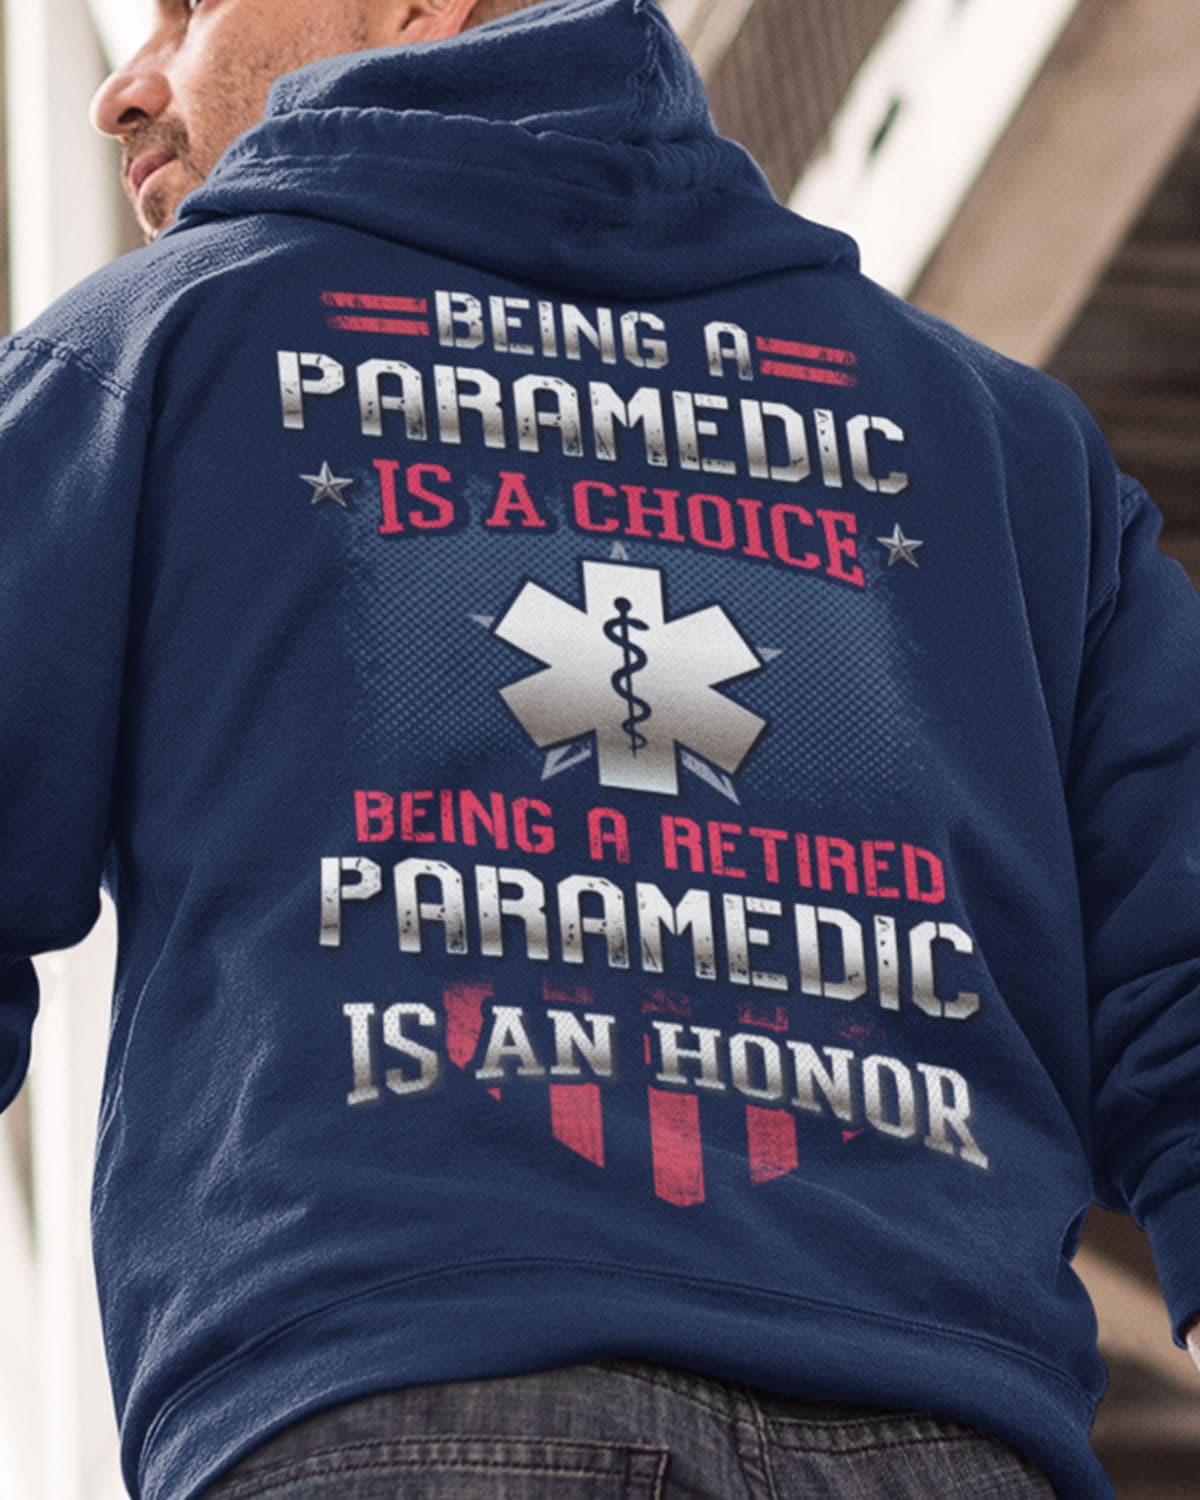 Being a paramedic is a choice, being a retired paramedic is an honor - Paramedic t-shirt